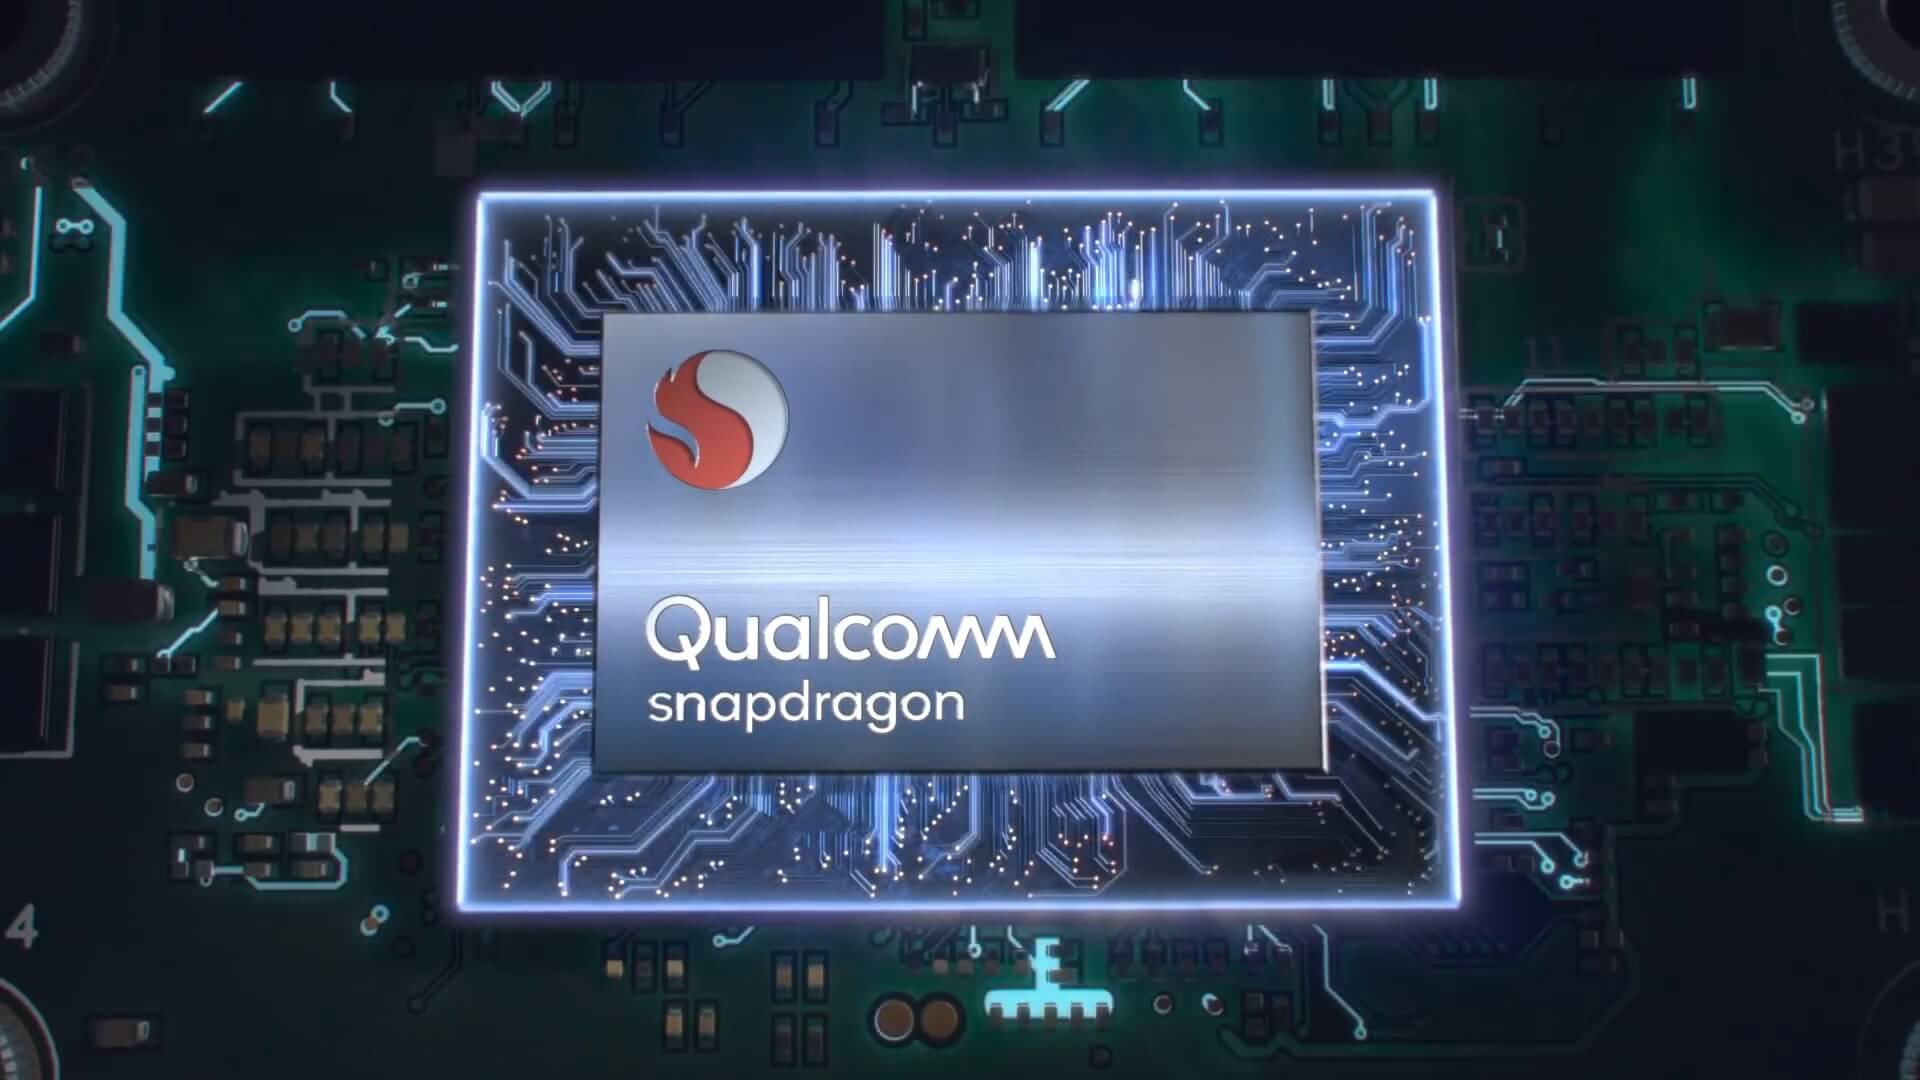 Qualcomm pits its Snapdragon 8cx against Intel's i5 8250U in benchmarks